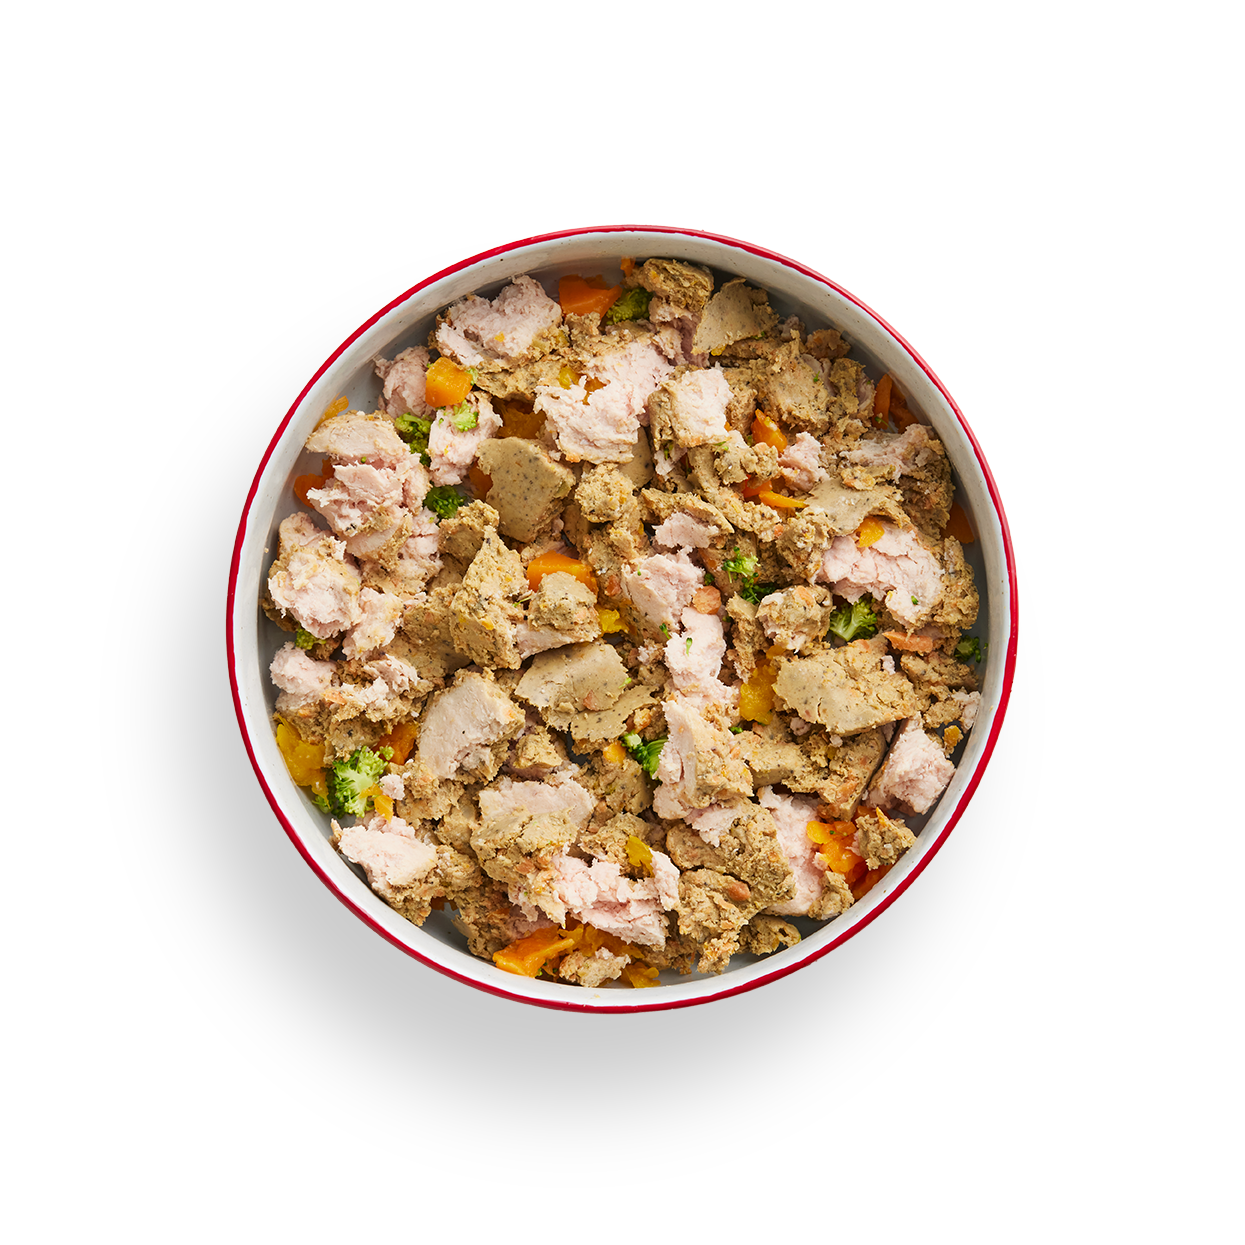 Heartly Fresh Dog Food Chicken Casserole with whole food